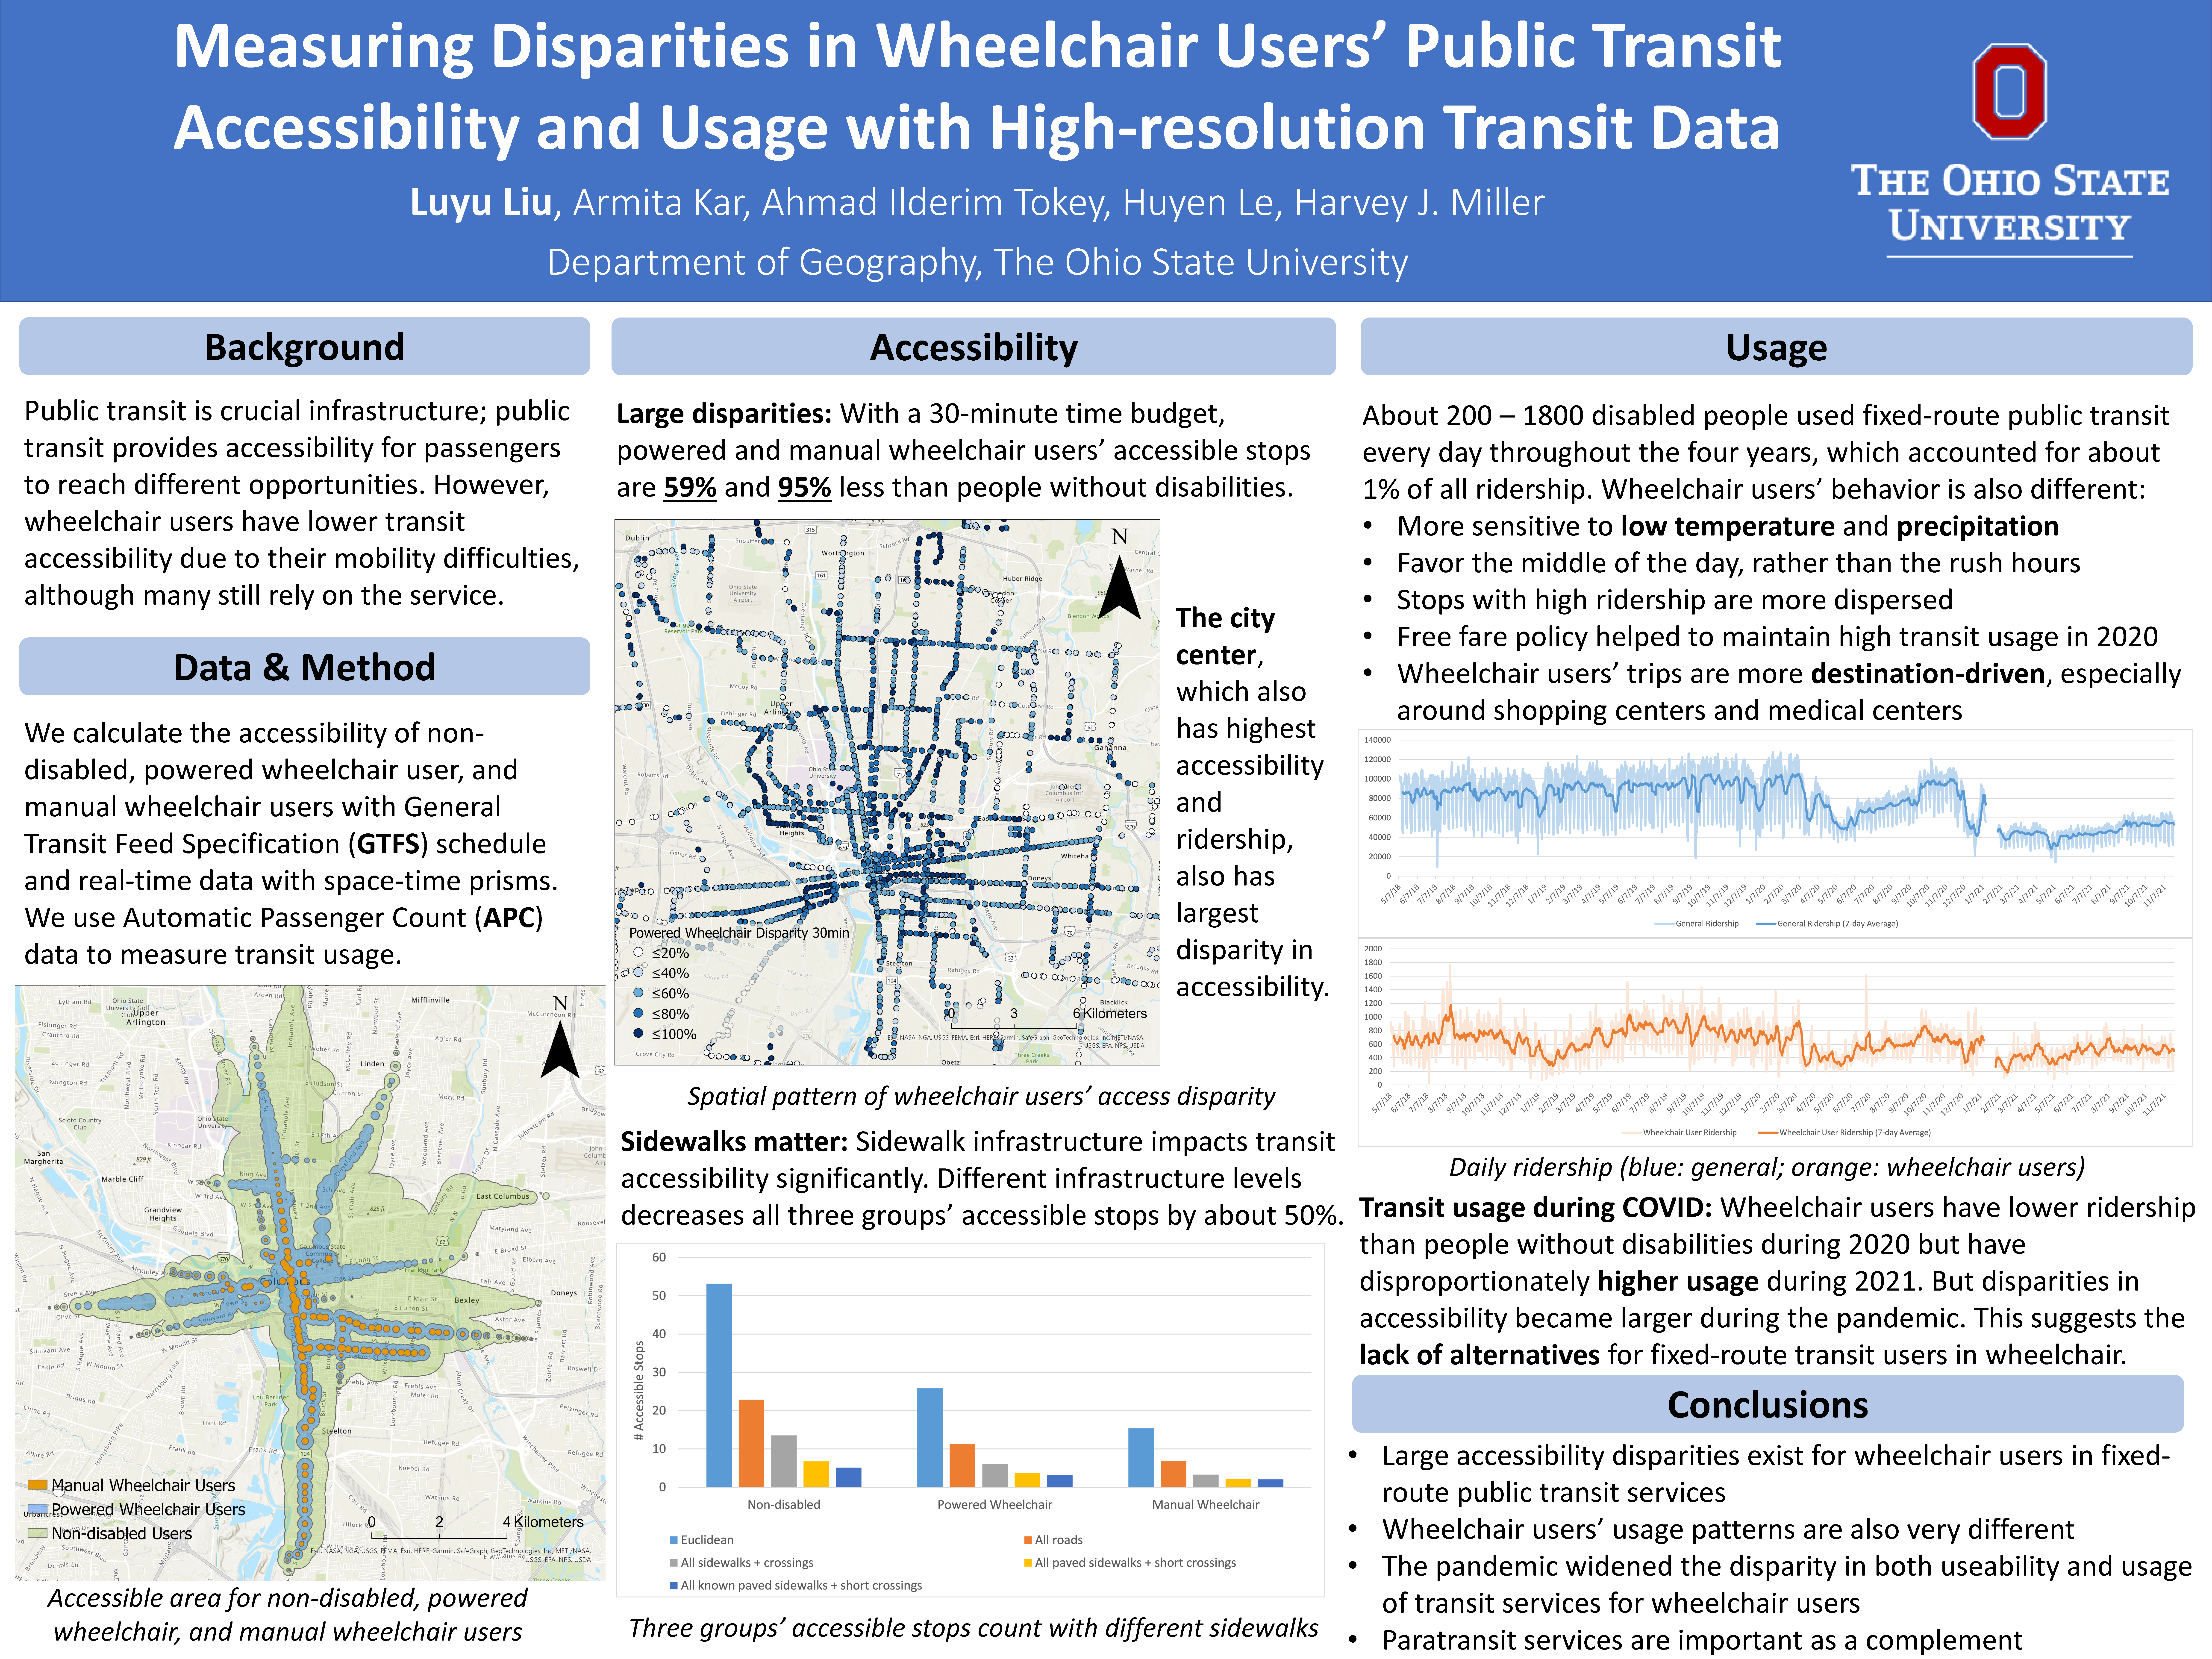 Measuring Disparities in Wheelchair Users’ Public Transit Accessibility and Usage with High-resolution Transit Data